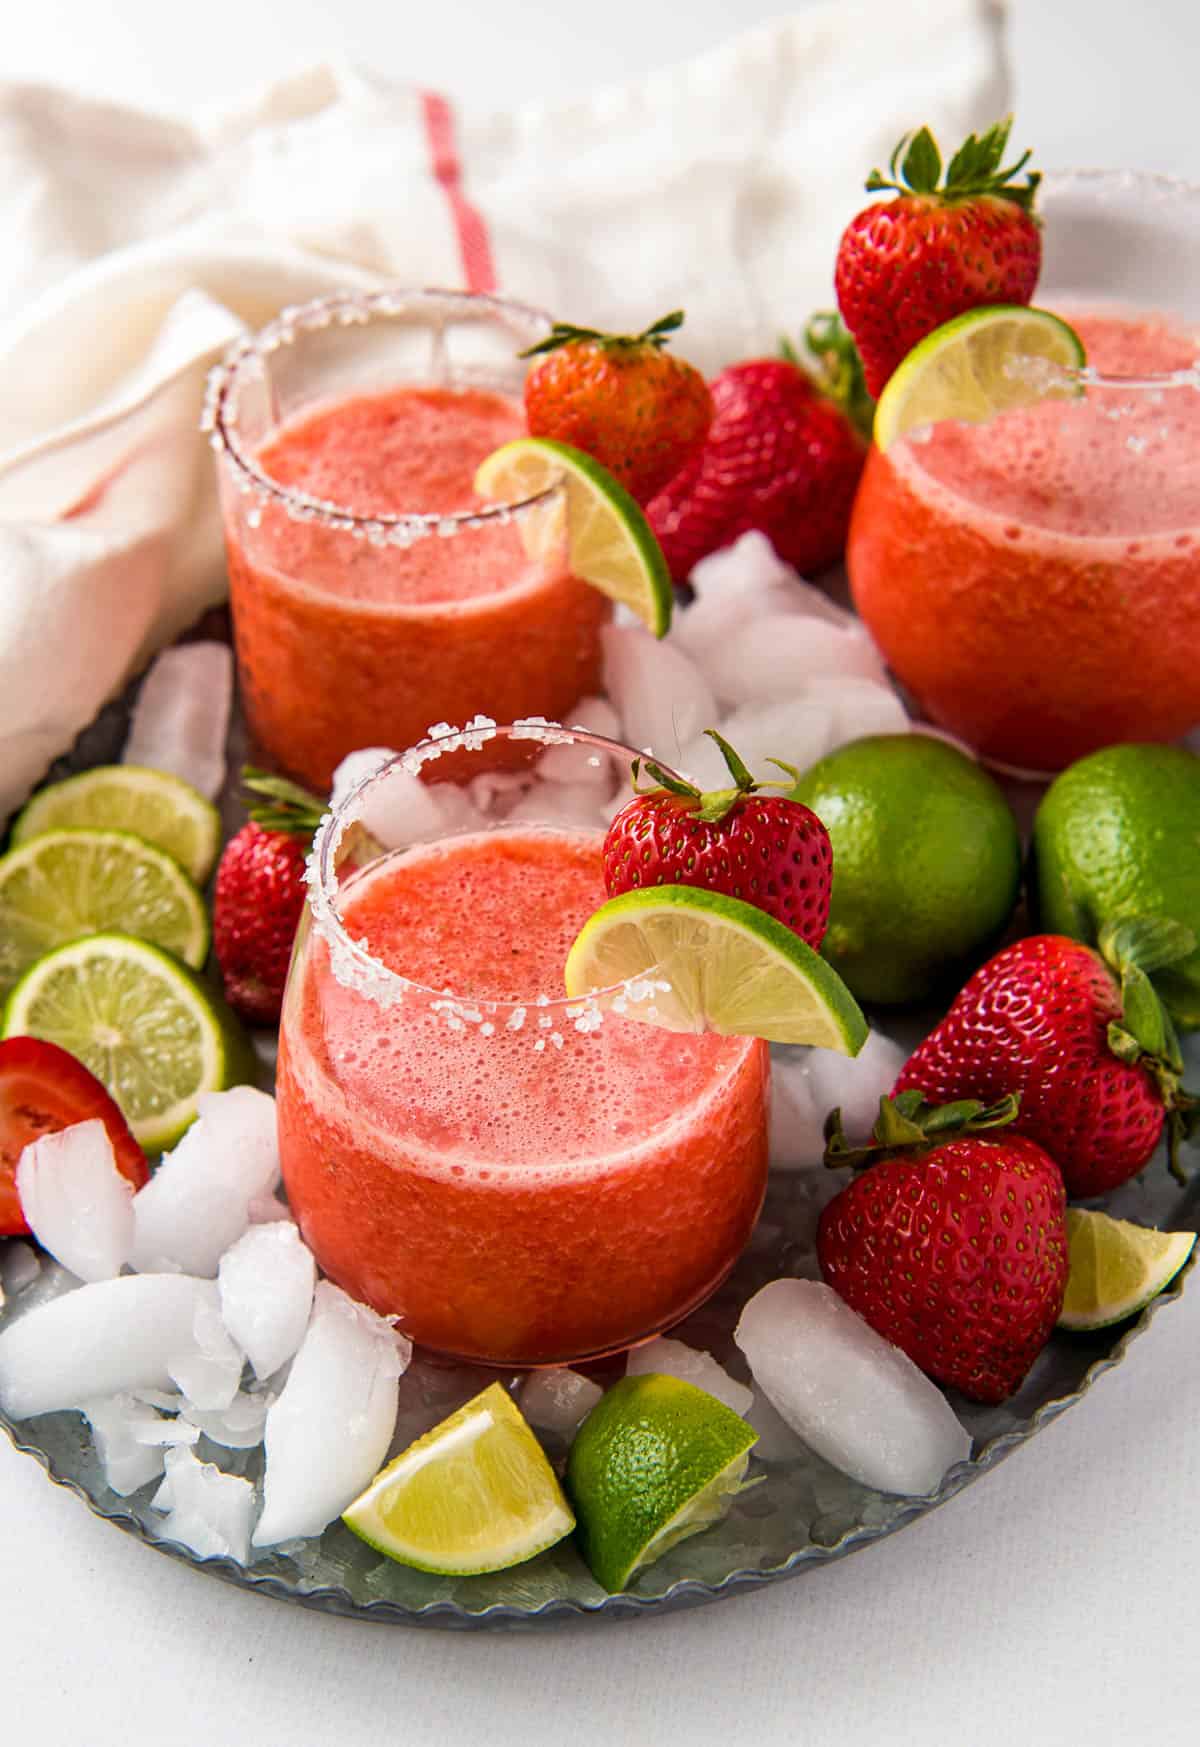 Three glasses of frozen strawberry margaritas on a serving tray garnished with ice cubs, strawberries and lime wedges.